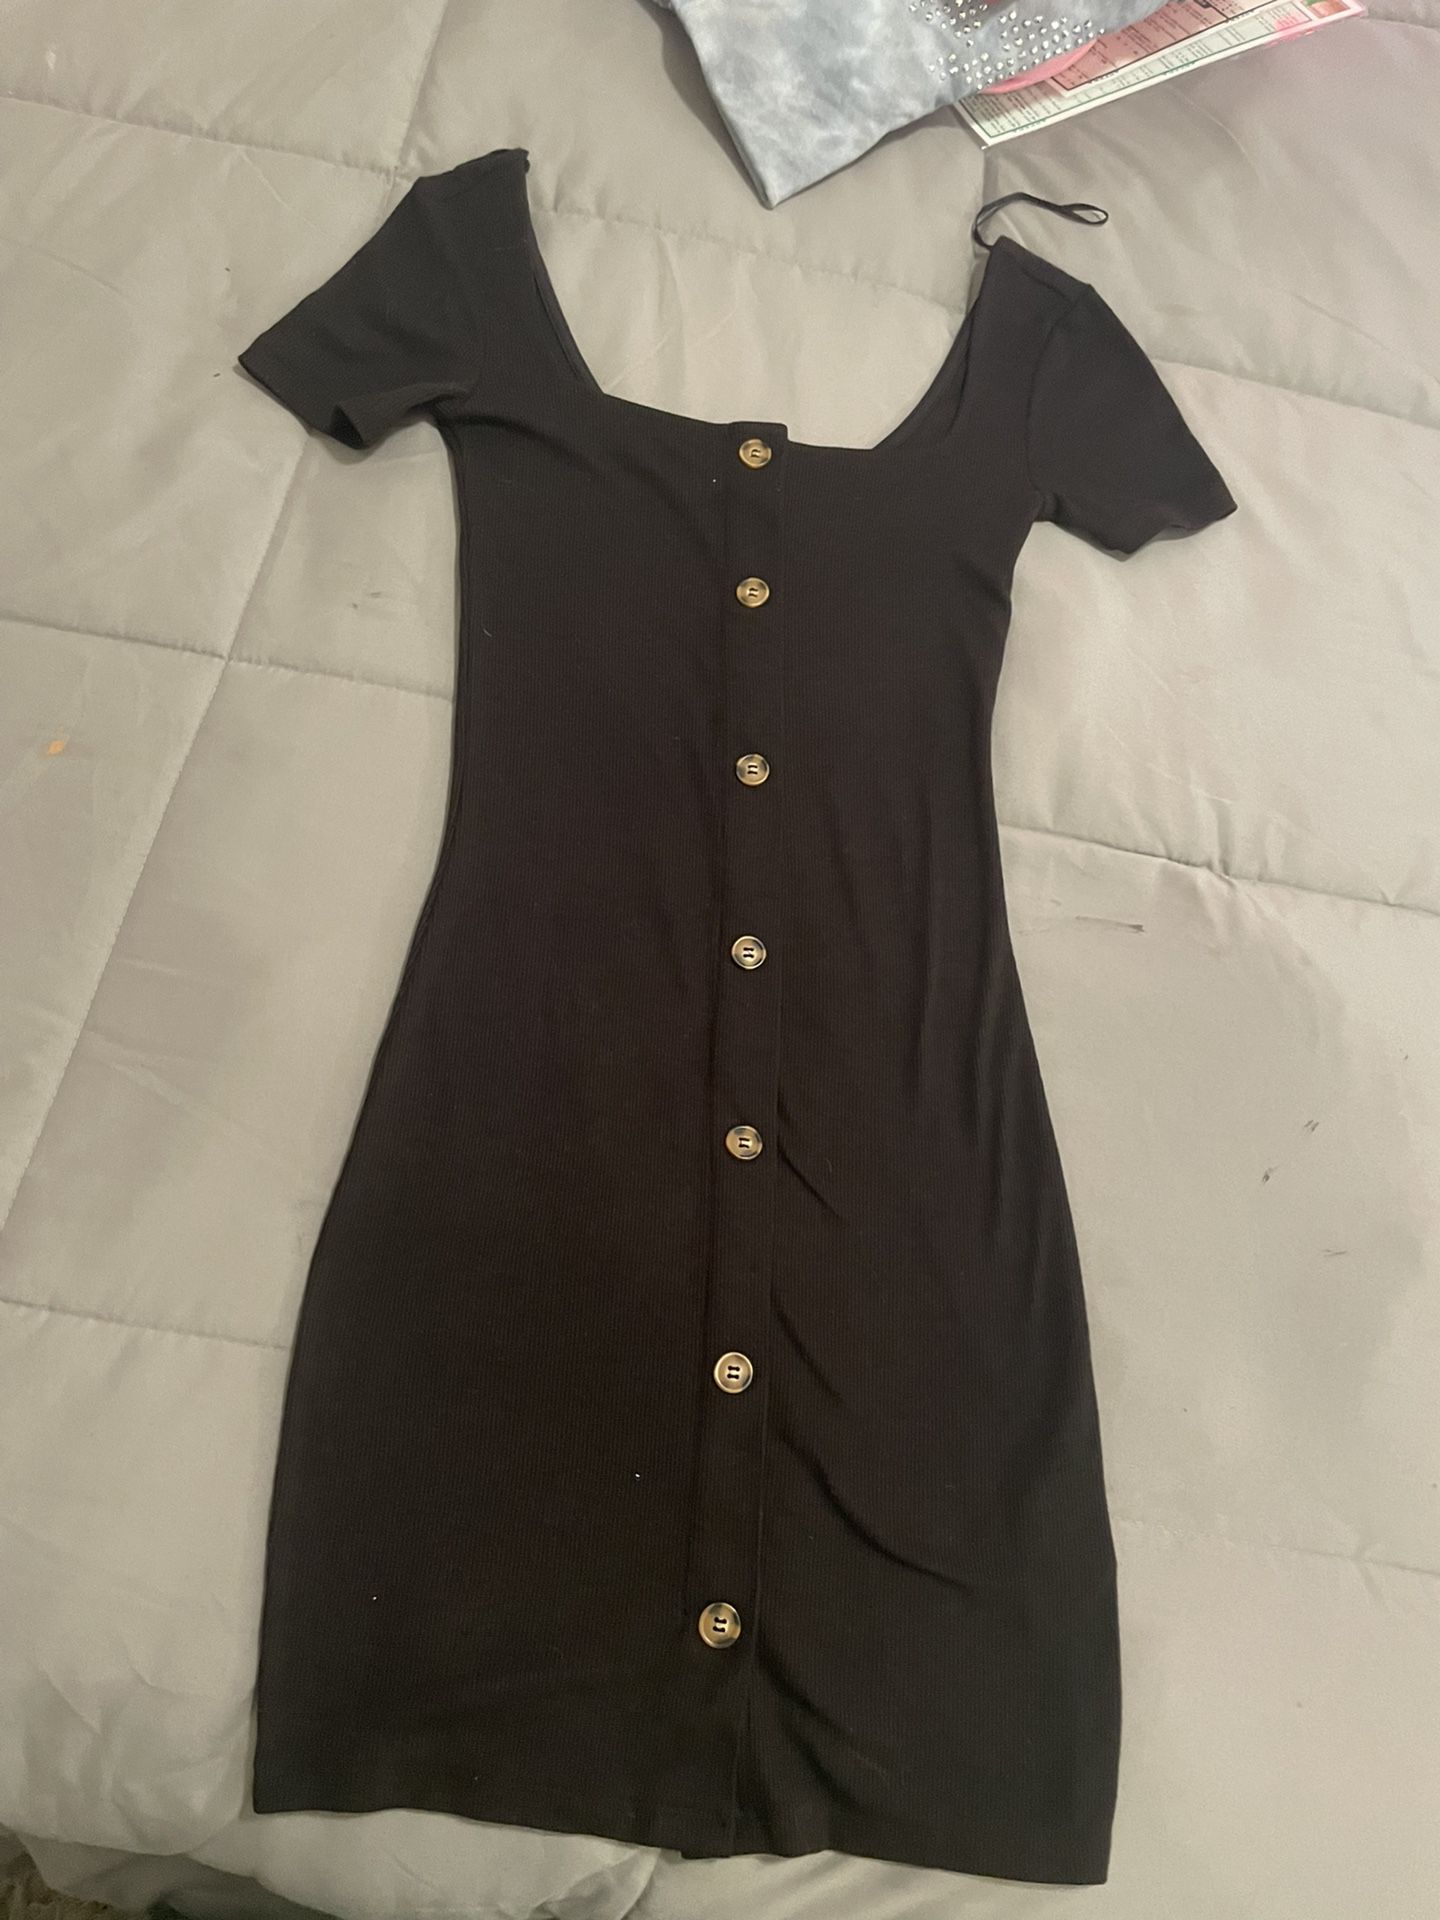 H&M XS Fitted Dress NWOT